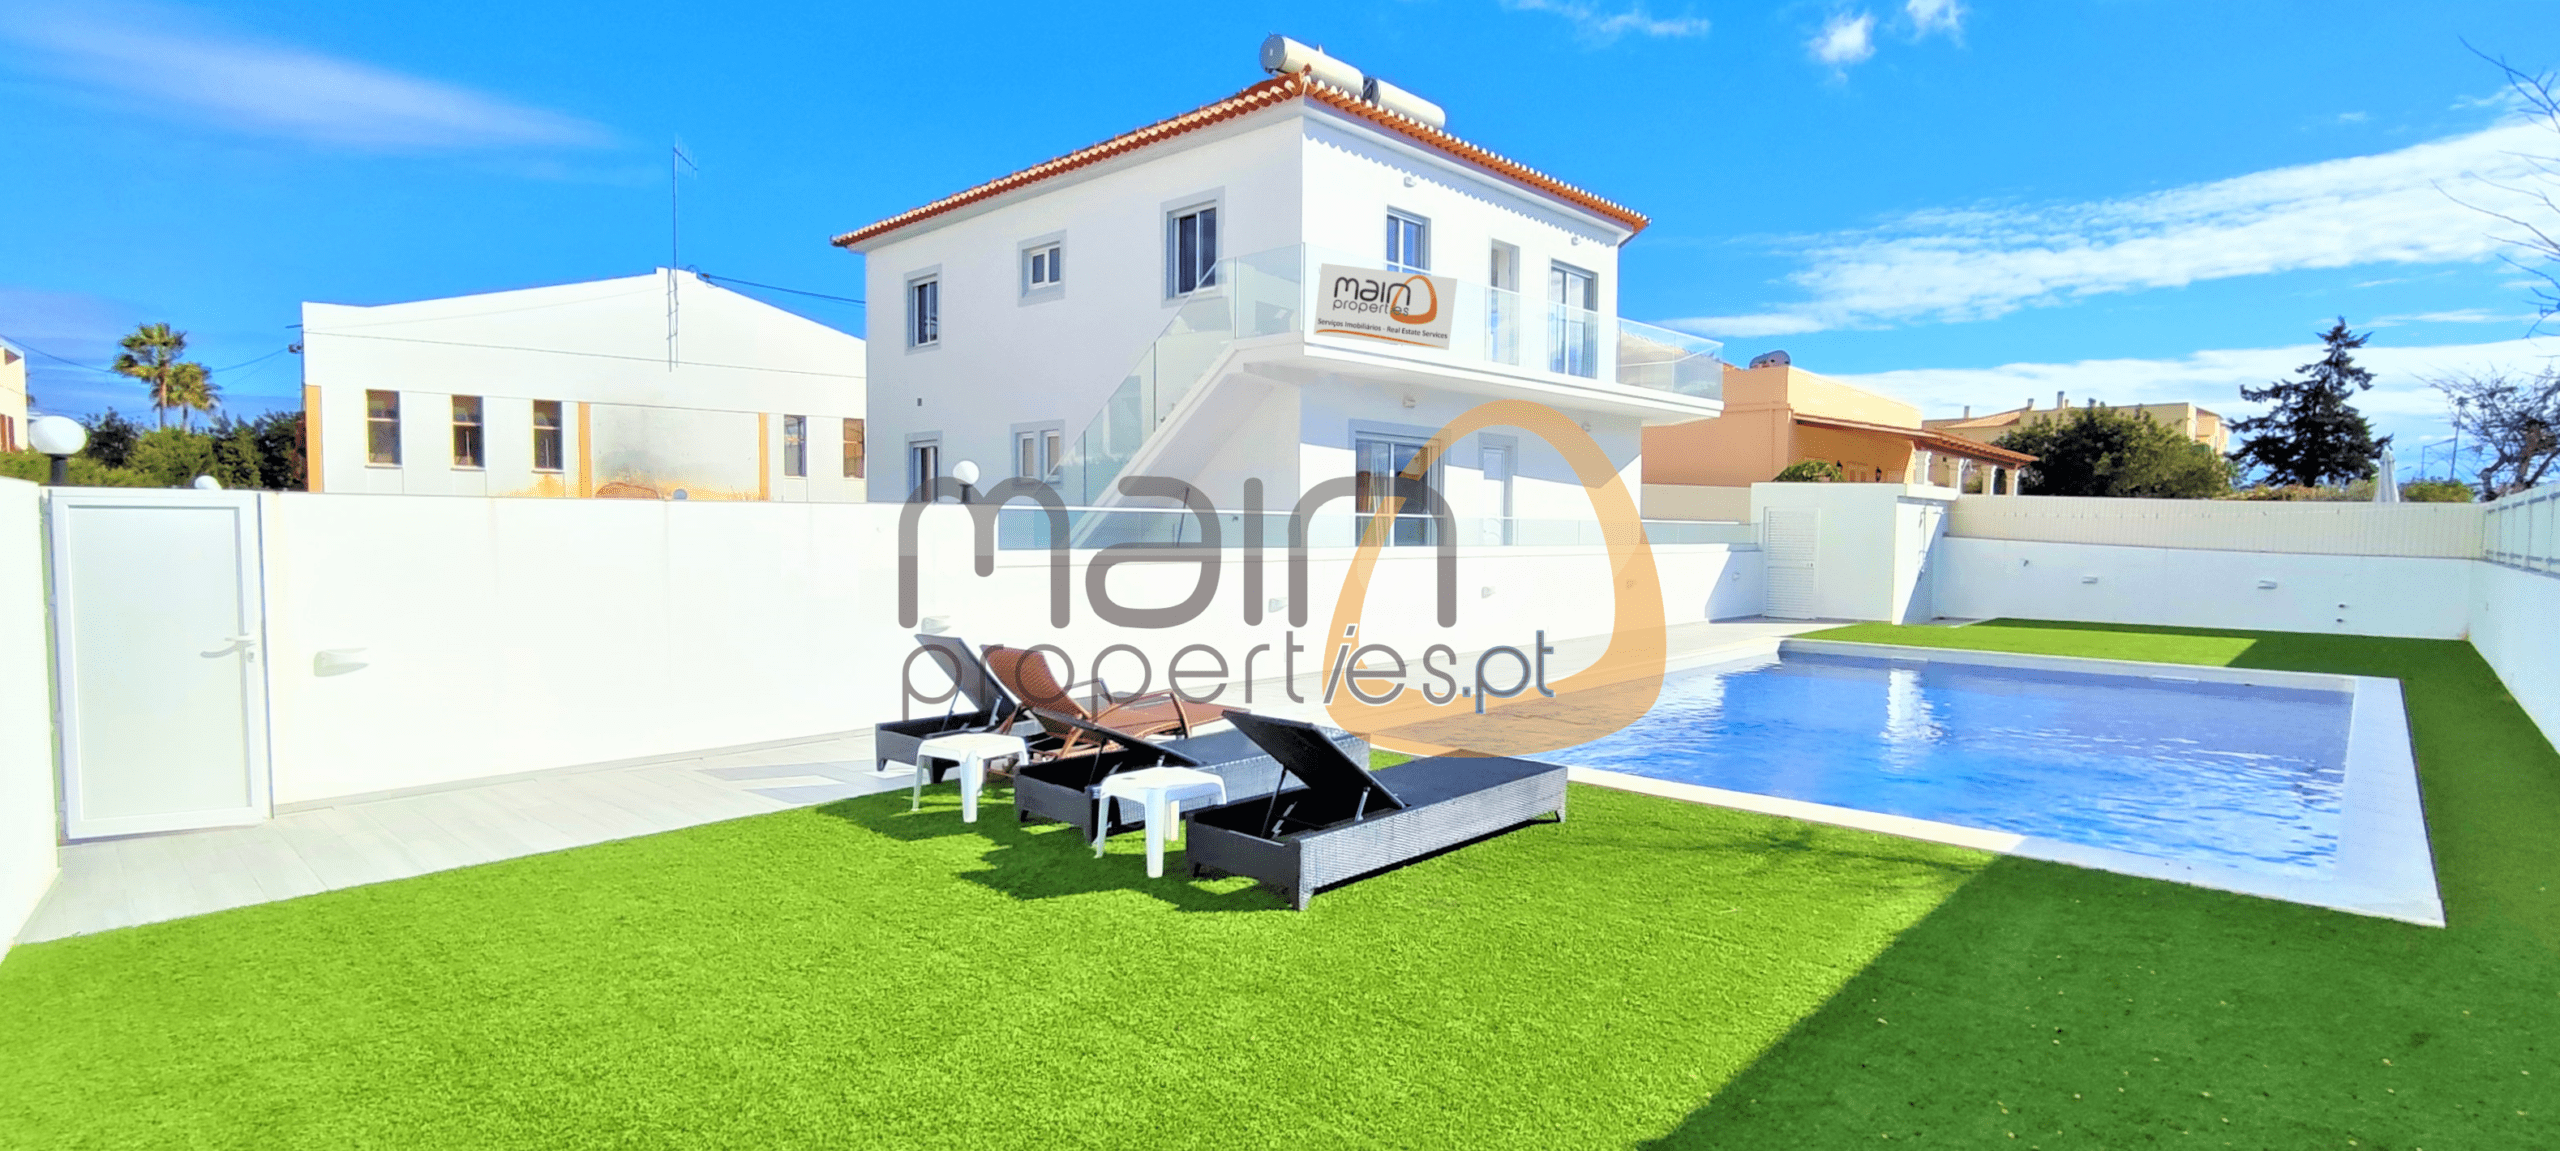 Plot with project for 7 villas + 2 apartments in Ferreiras in Albufeira